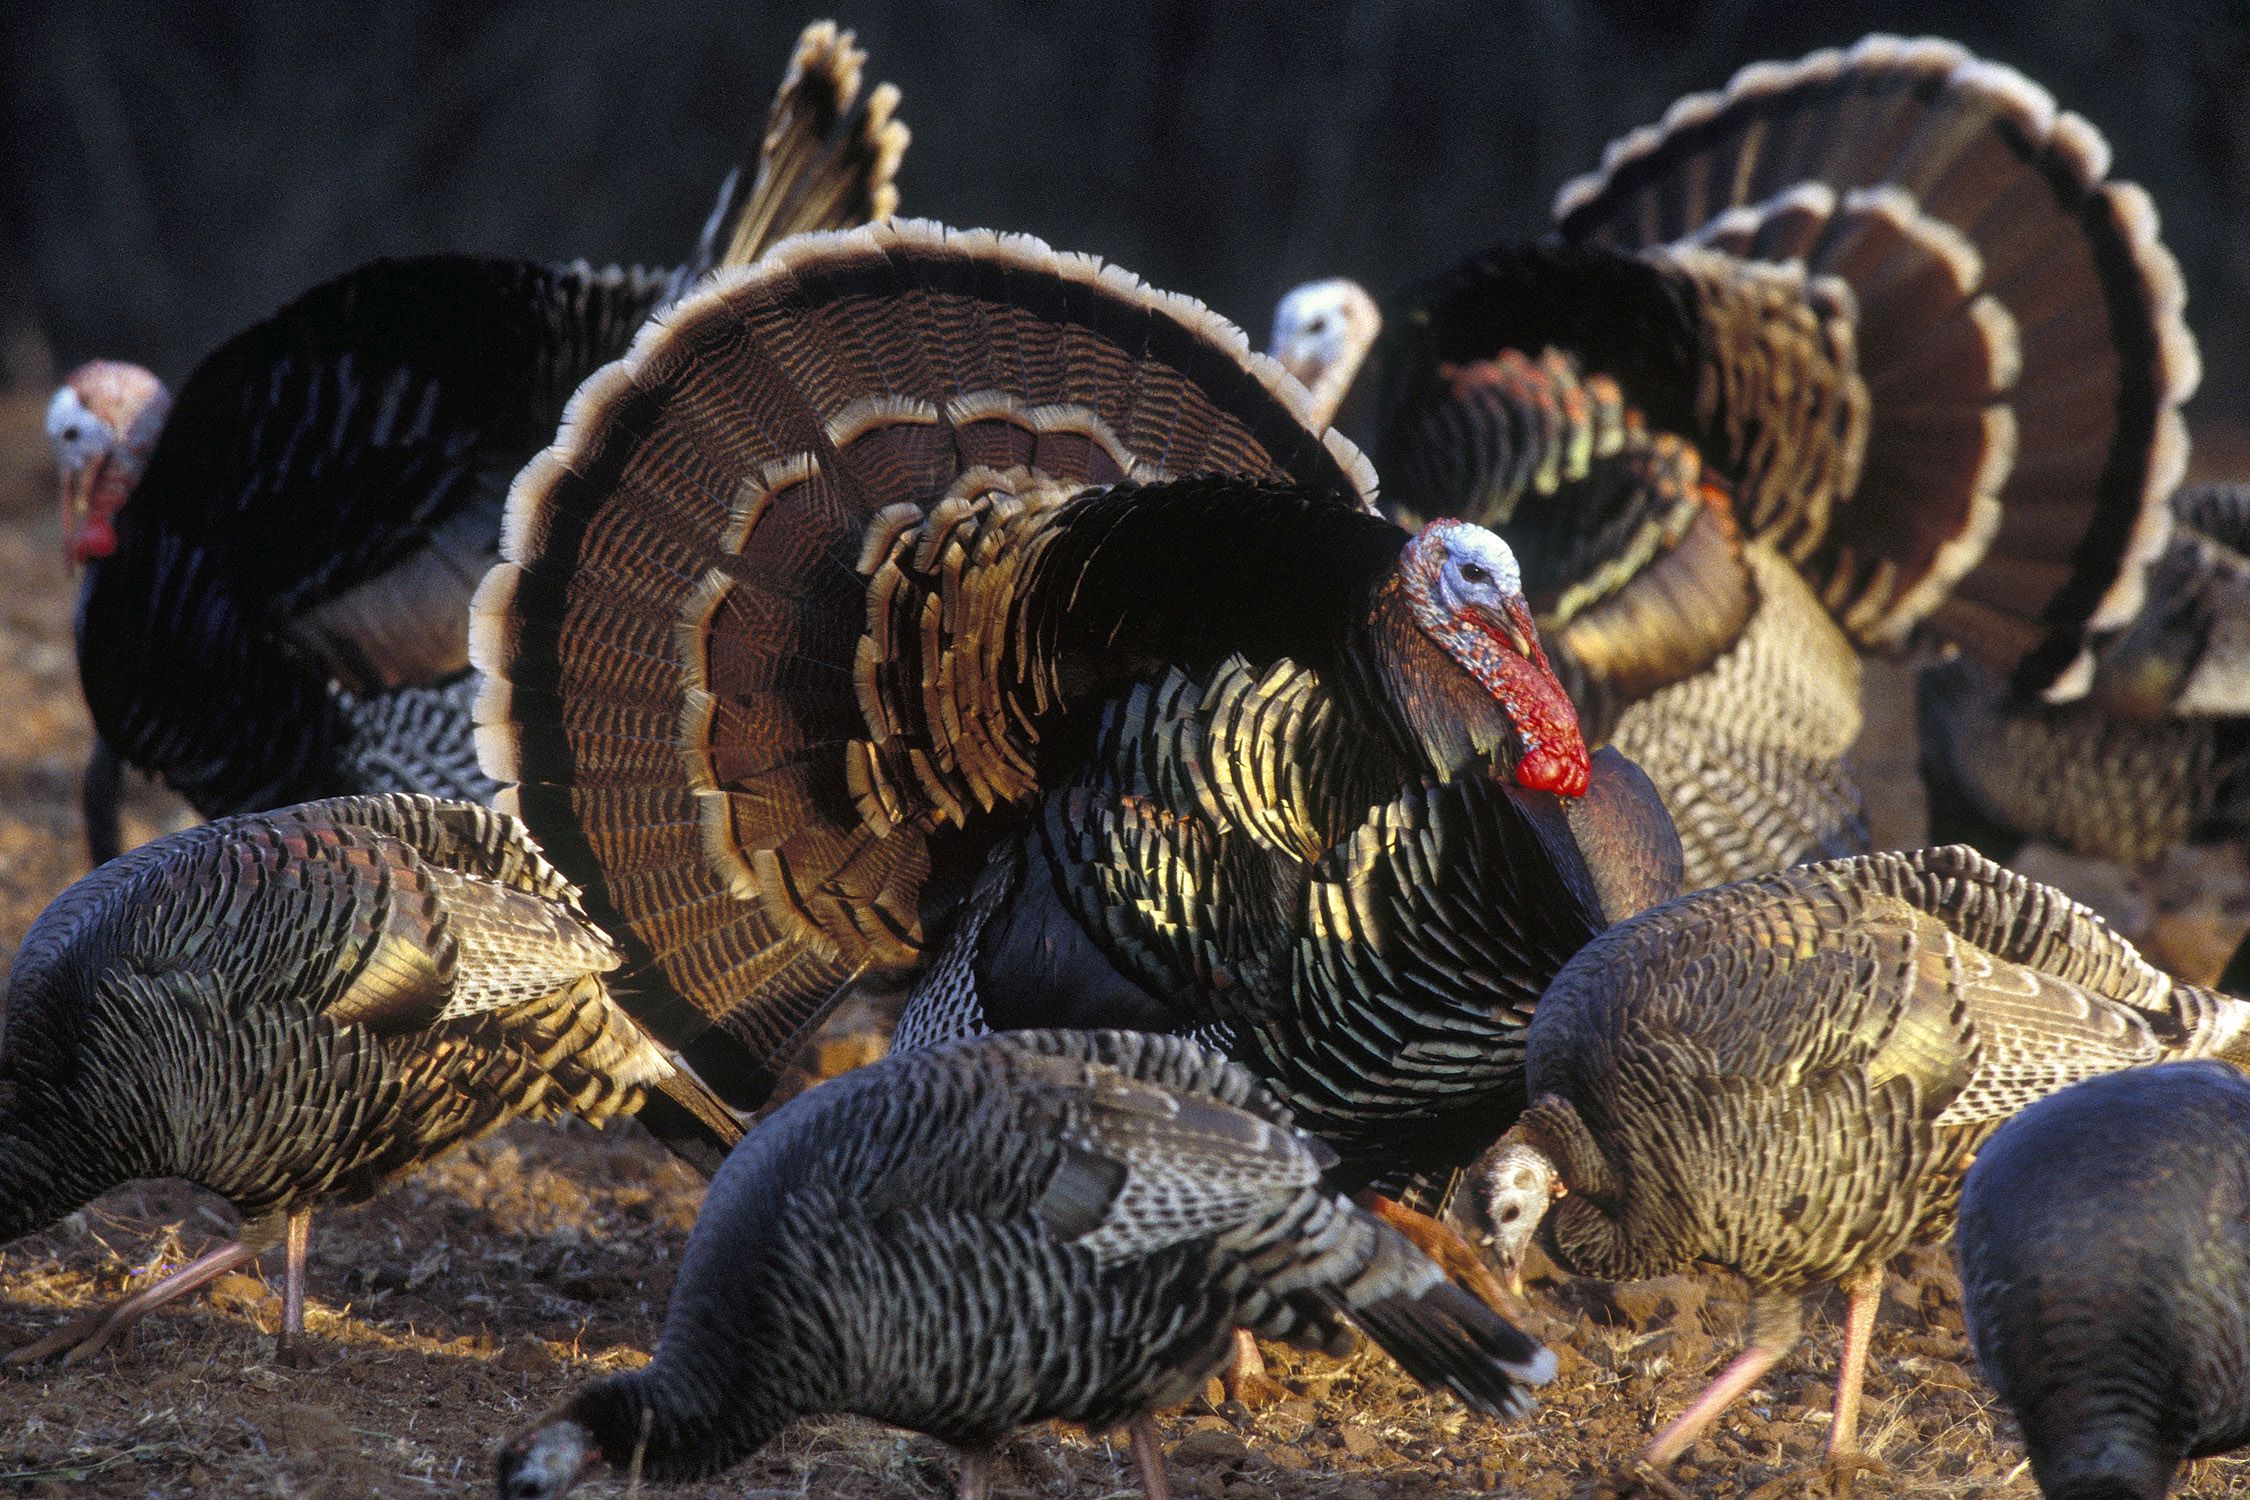 Wild turkeys (fat brown ground birds) fan their tail feathers and feed from the ground.